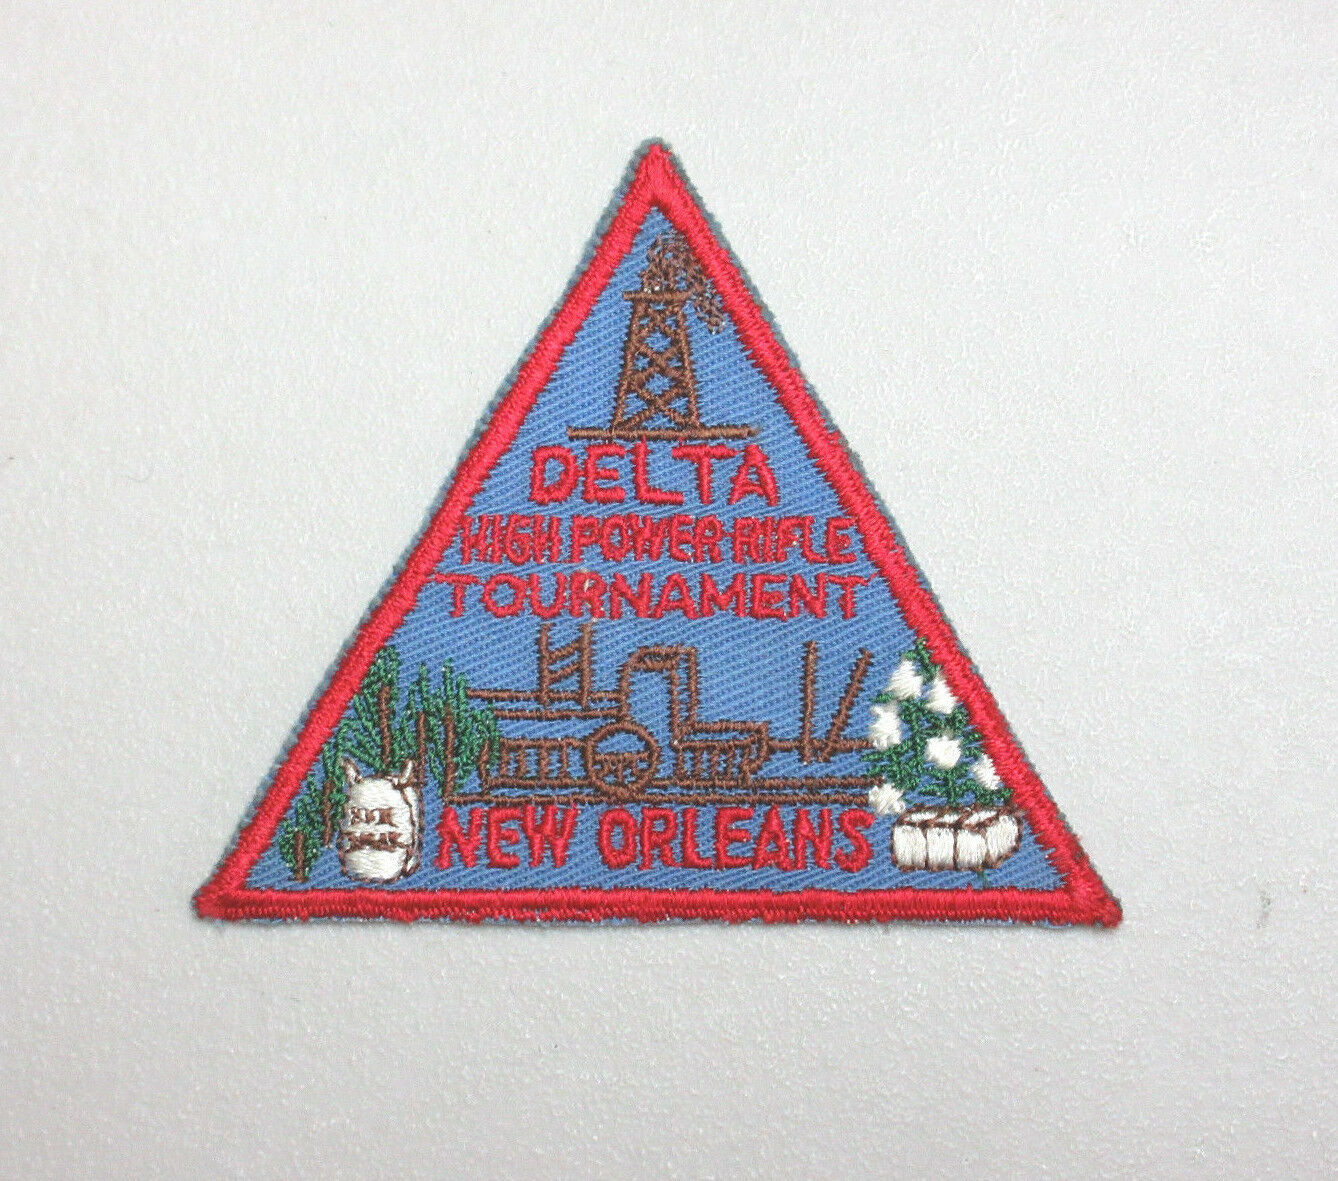 Delta High Power Rifle Tournament New Orleans, Louisiana Collectible Patch